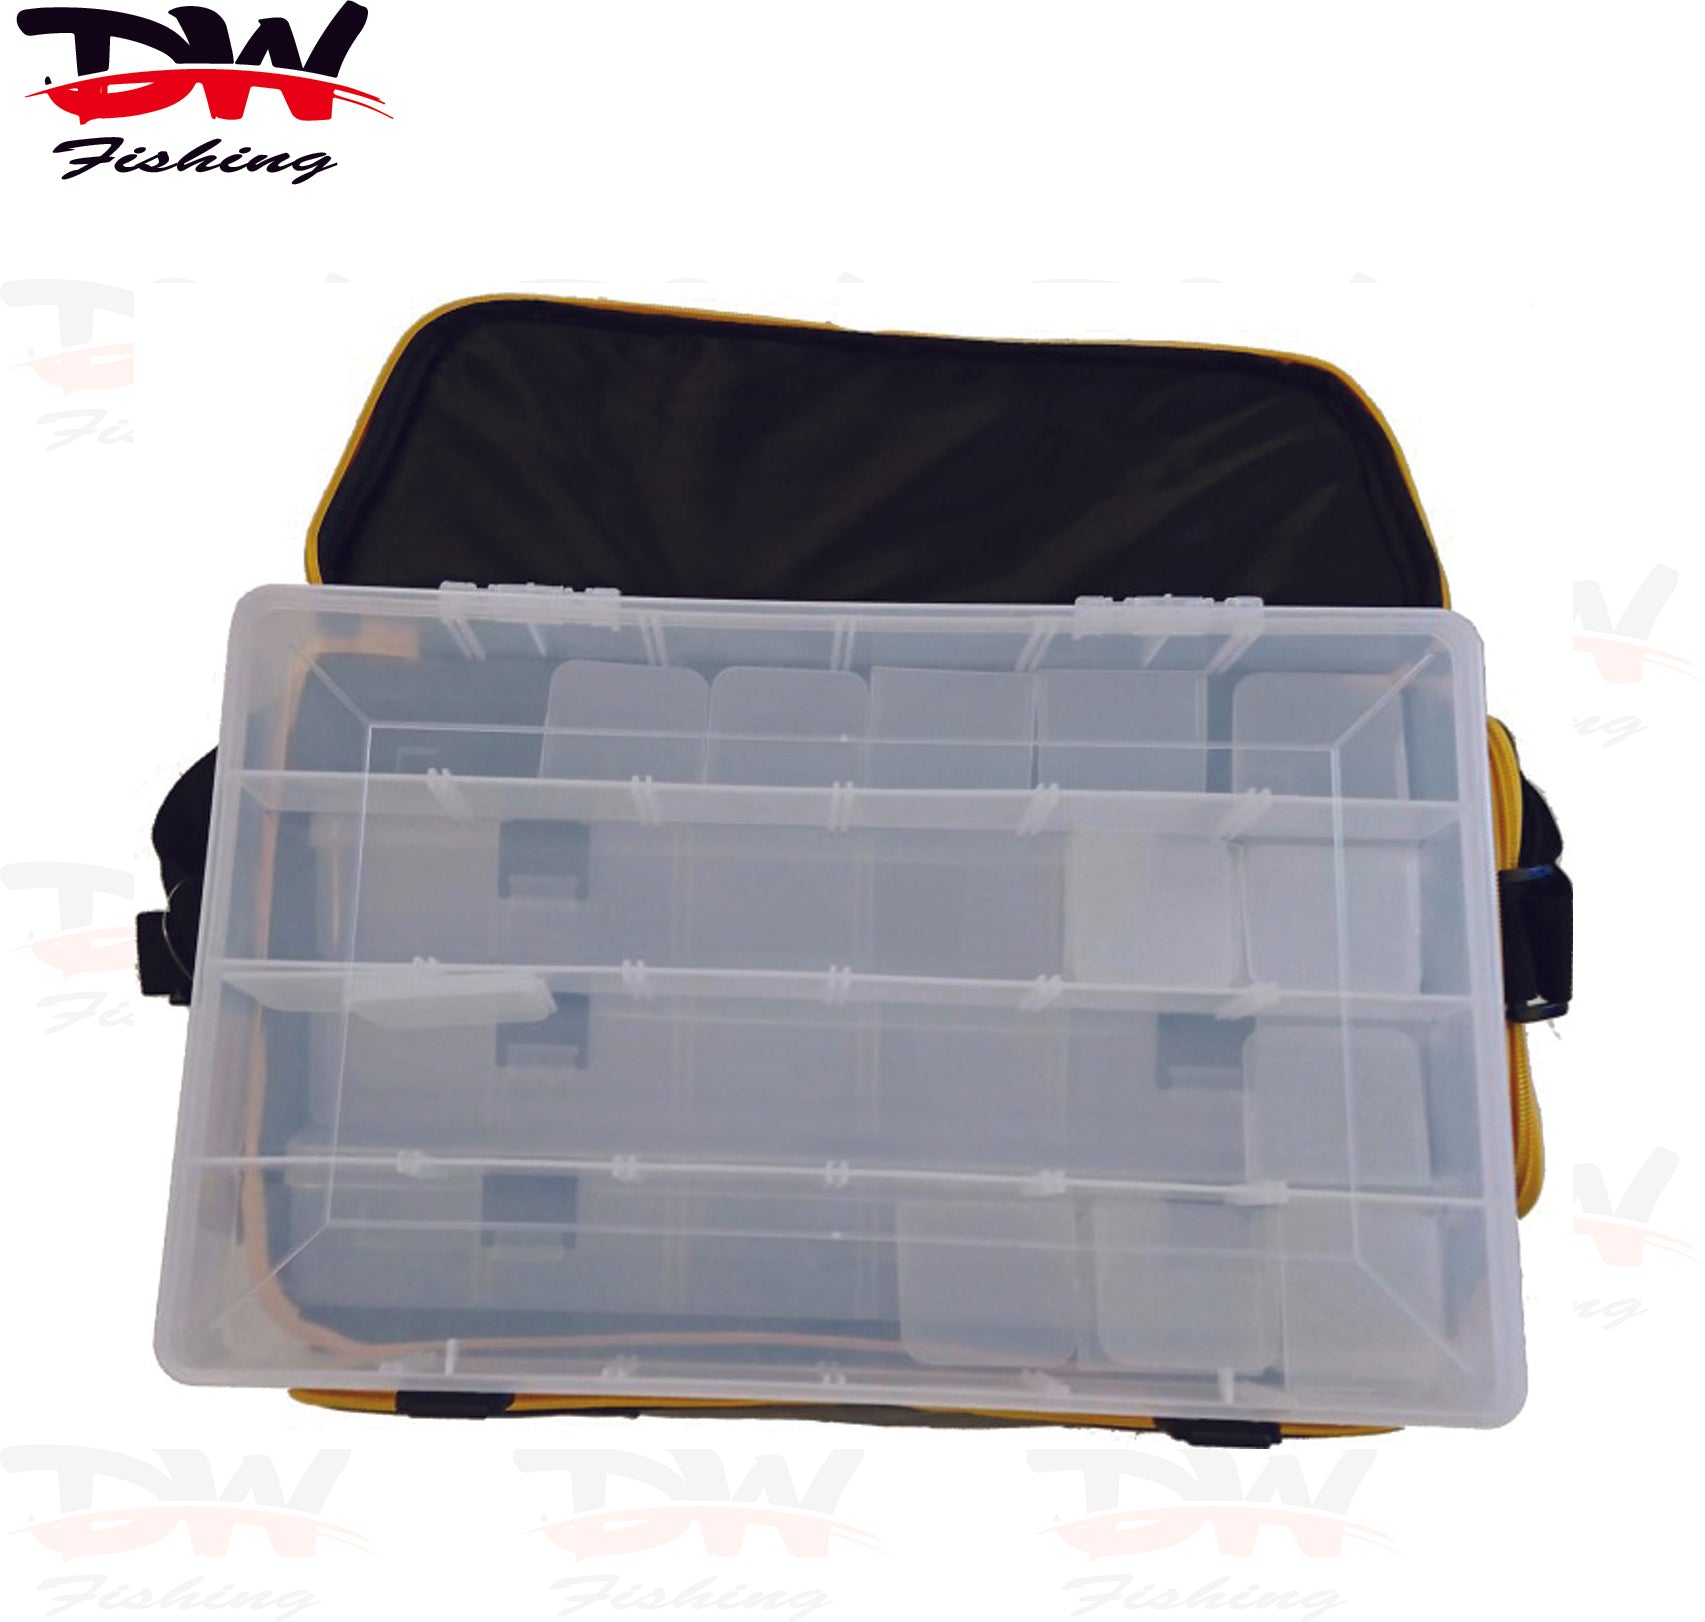 Fishing Tackle Bag with Four Large Fishing Tackle Trays